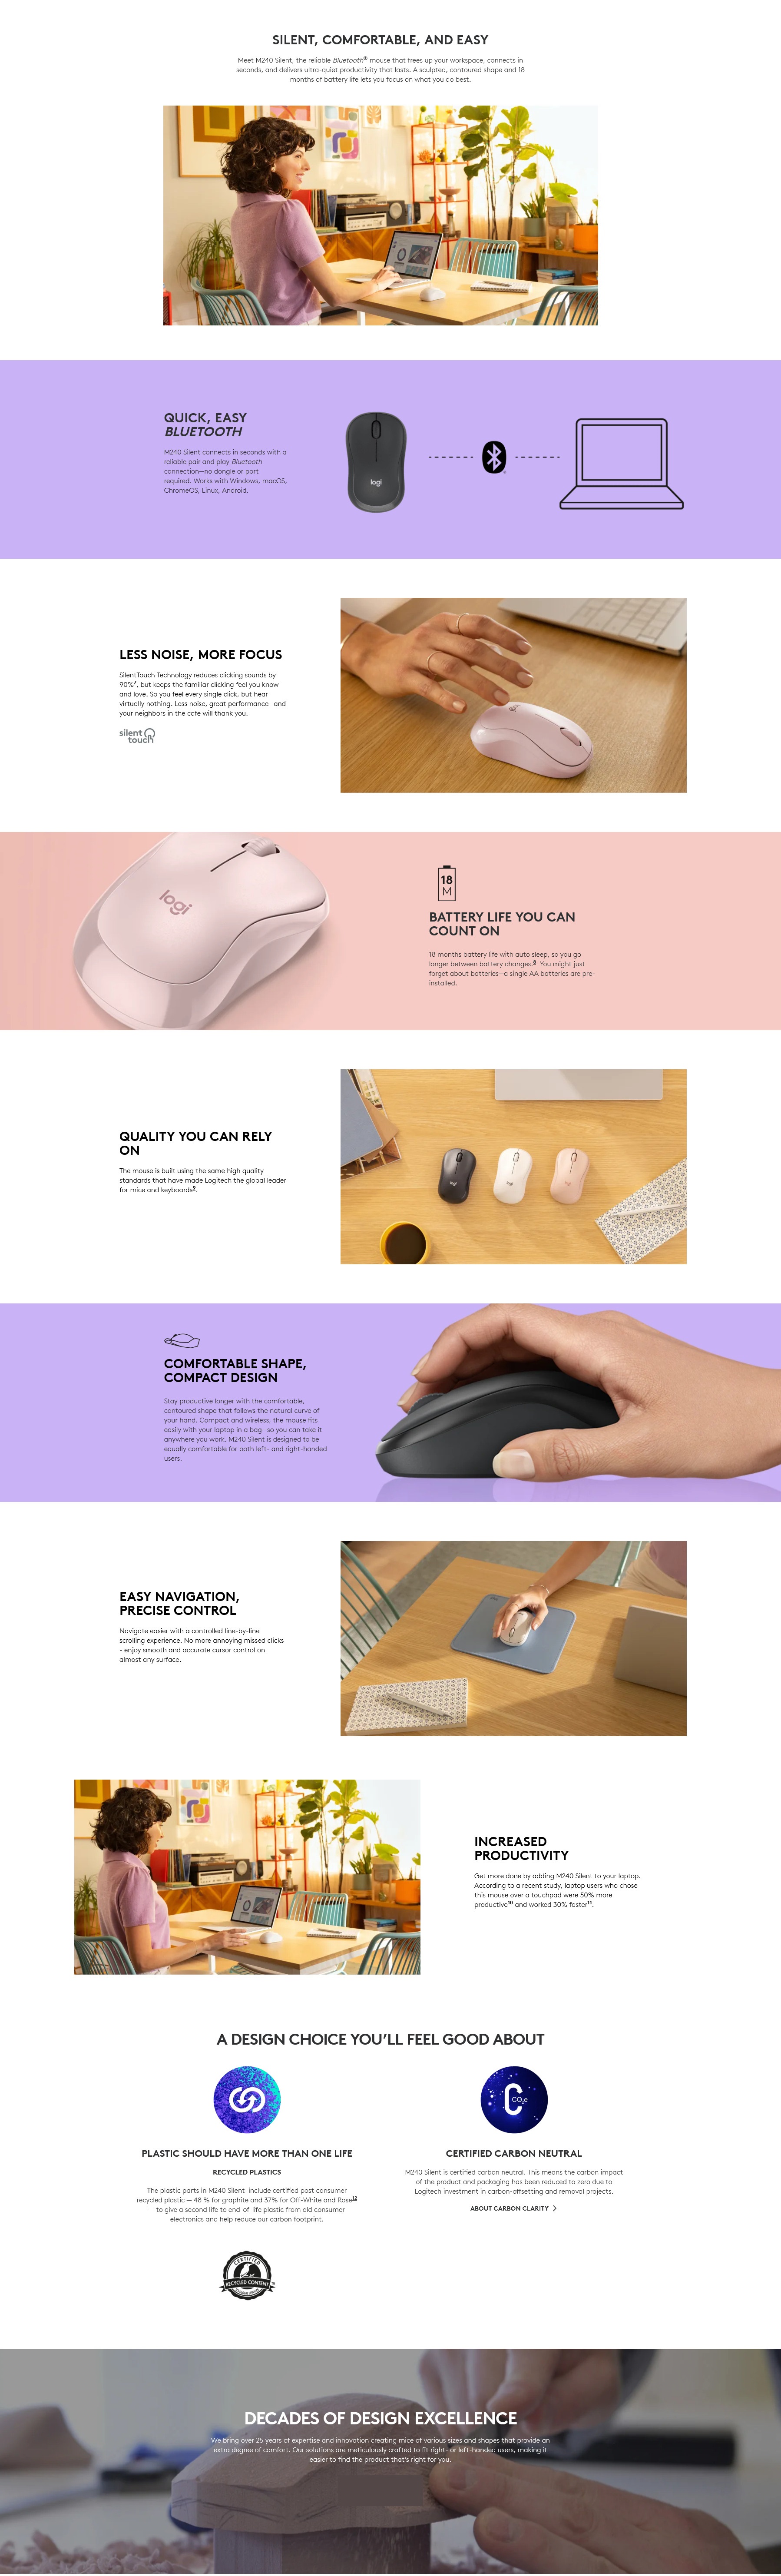 A large marketing image providing additional information about the product Logitech M240 Silent Bluetooth Mouse - Rose - Additional alt info not provided